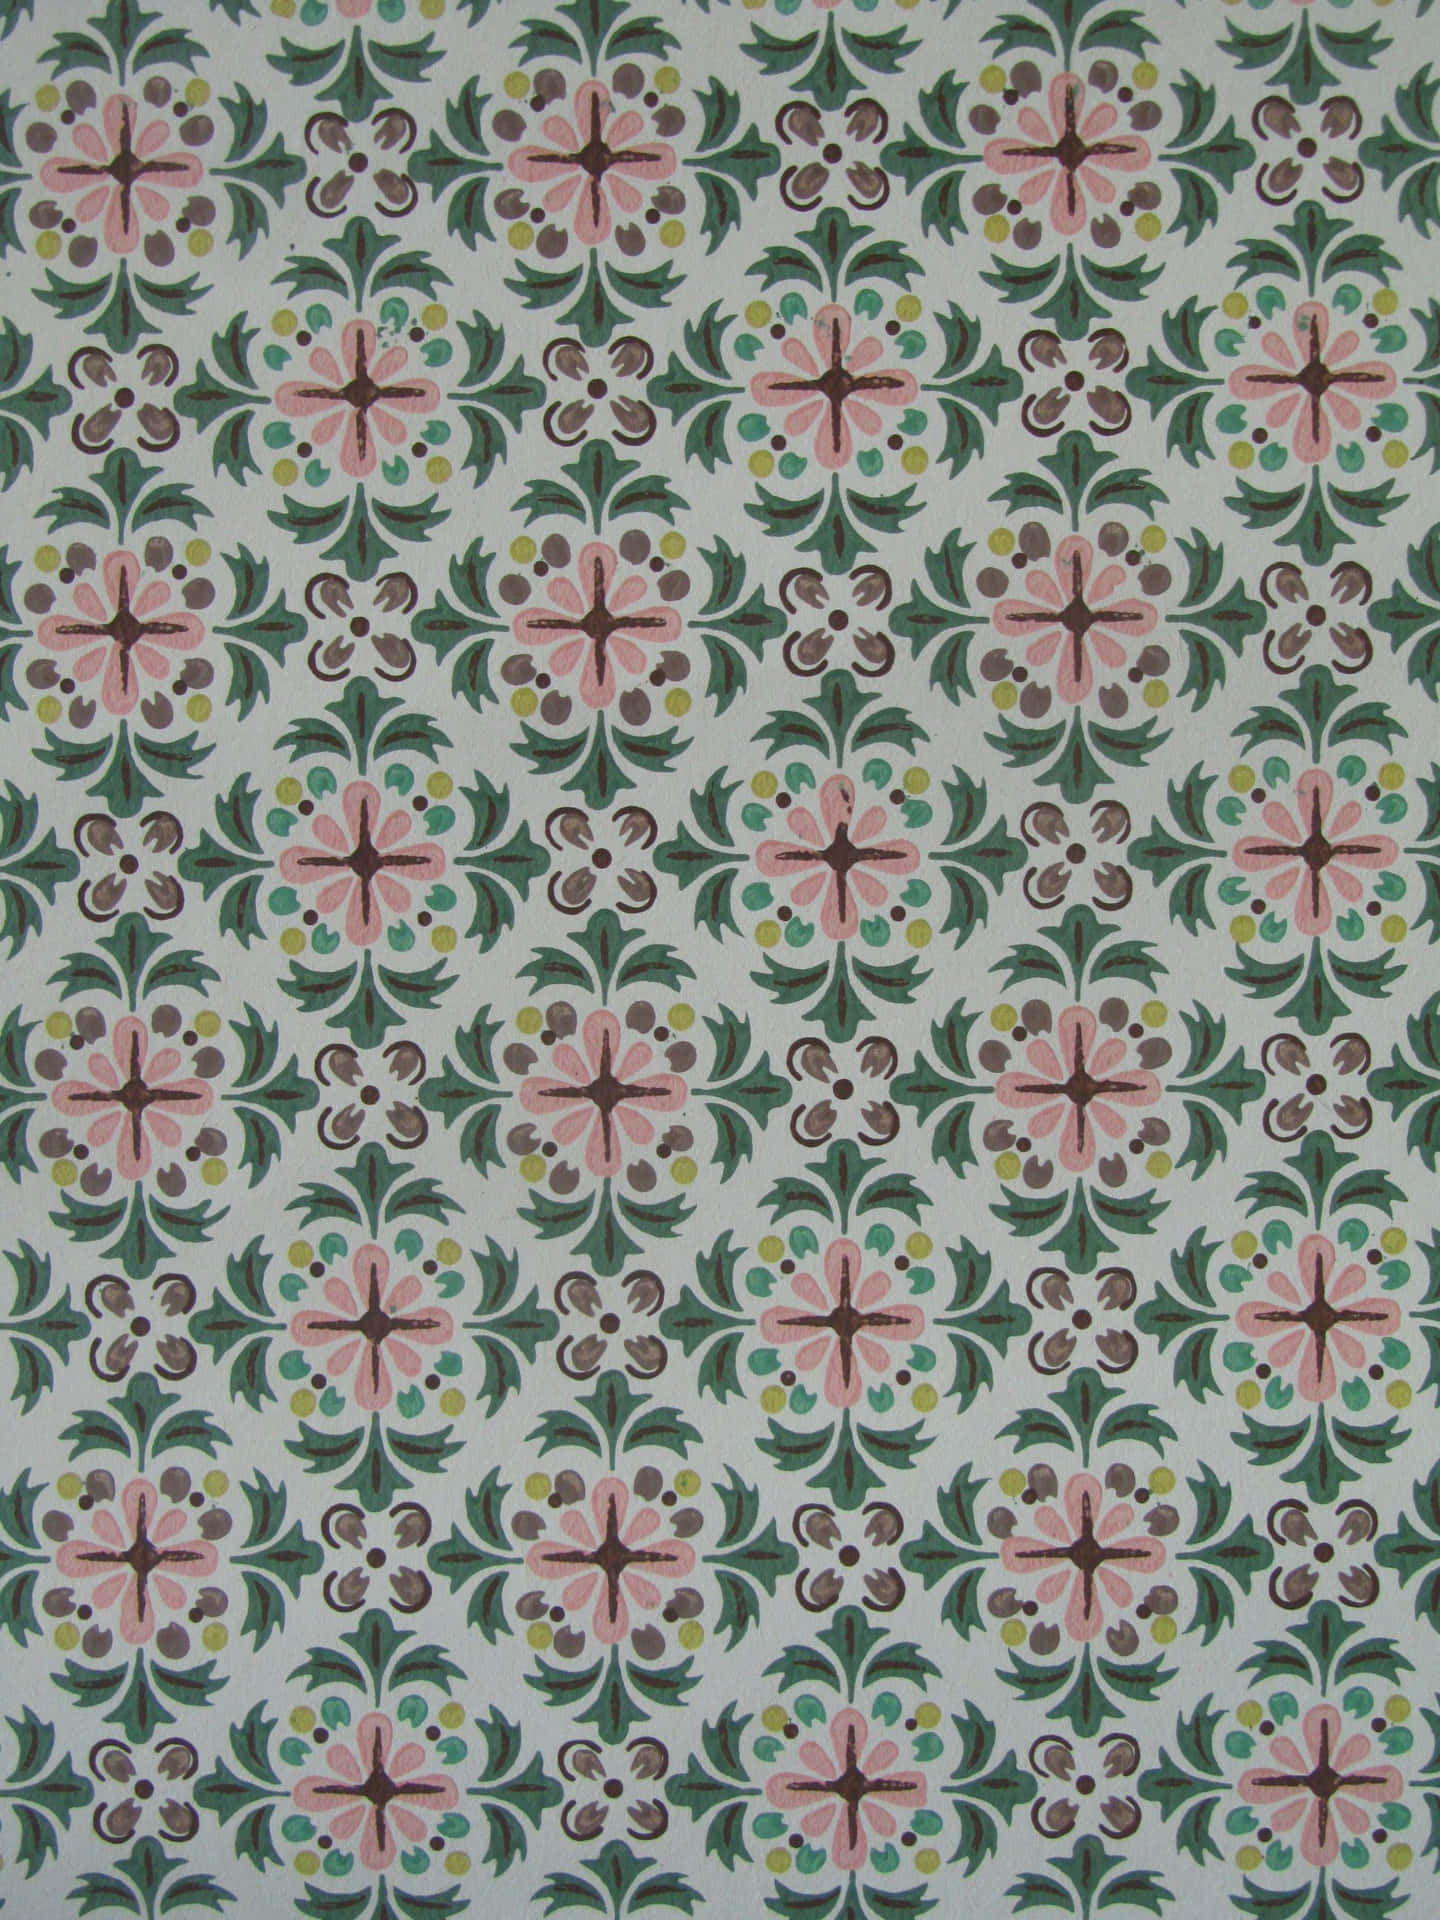 A Green And Pink Tile With Floral Designs Wallpaper